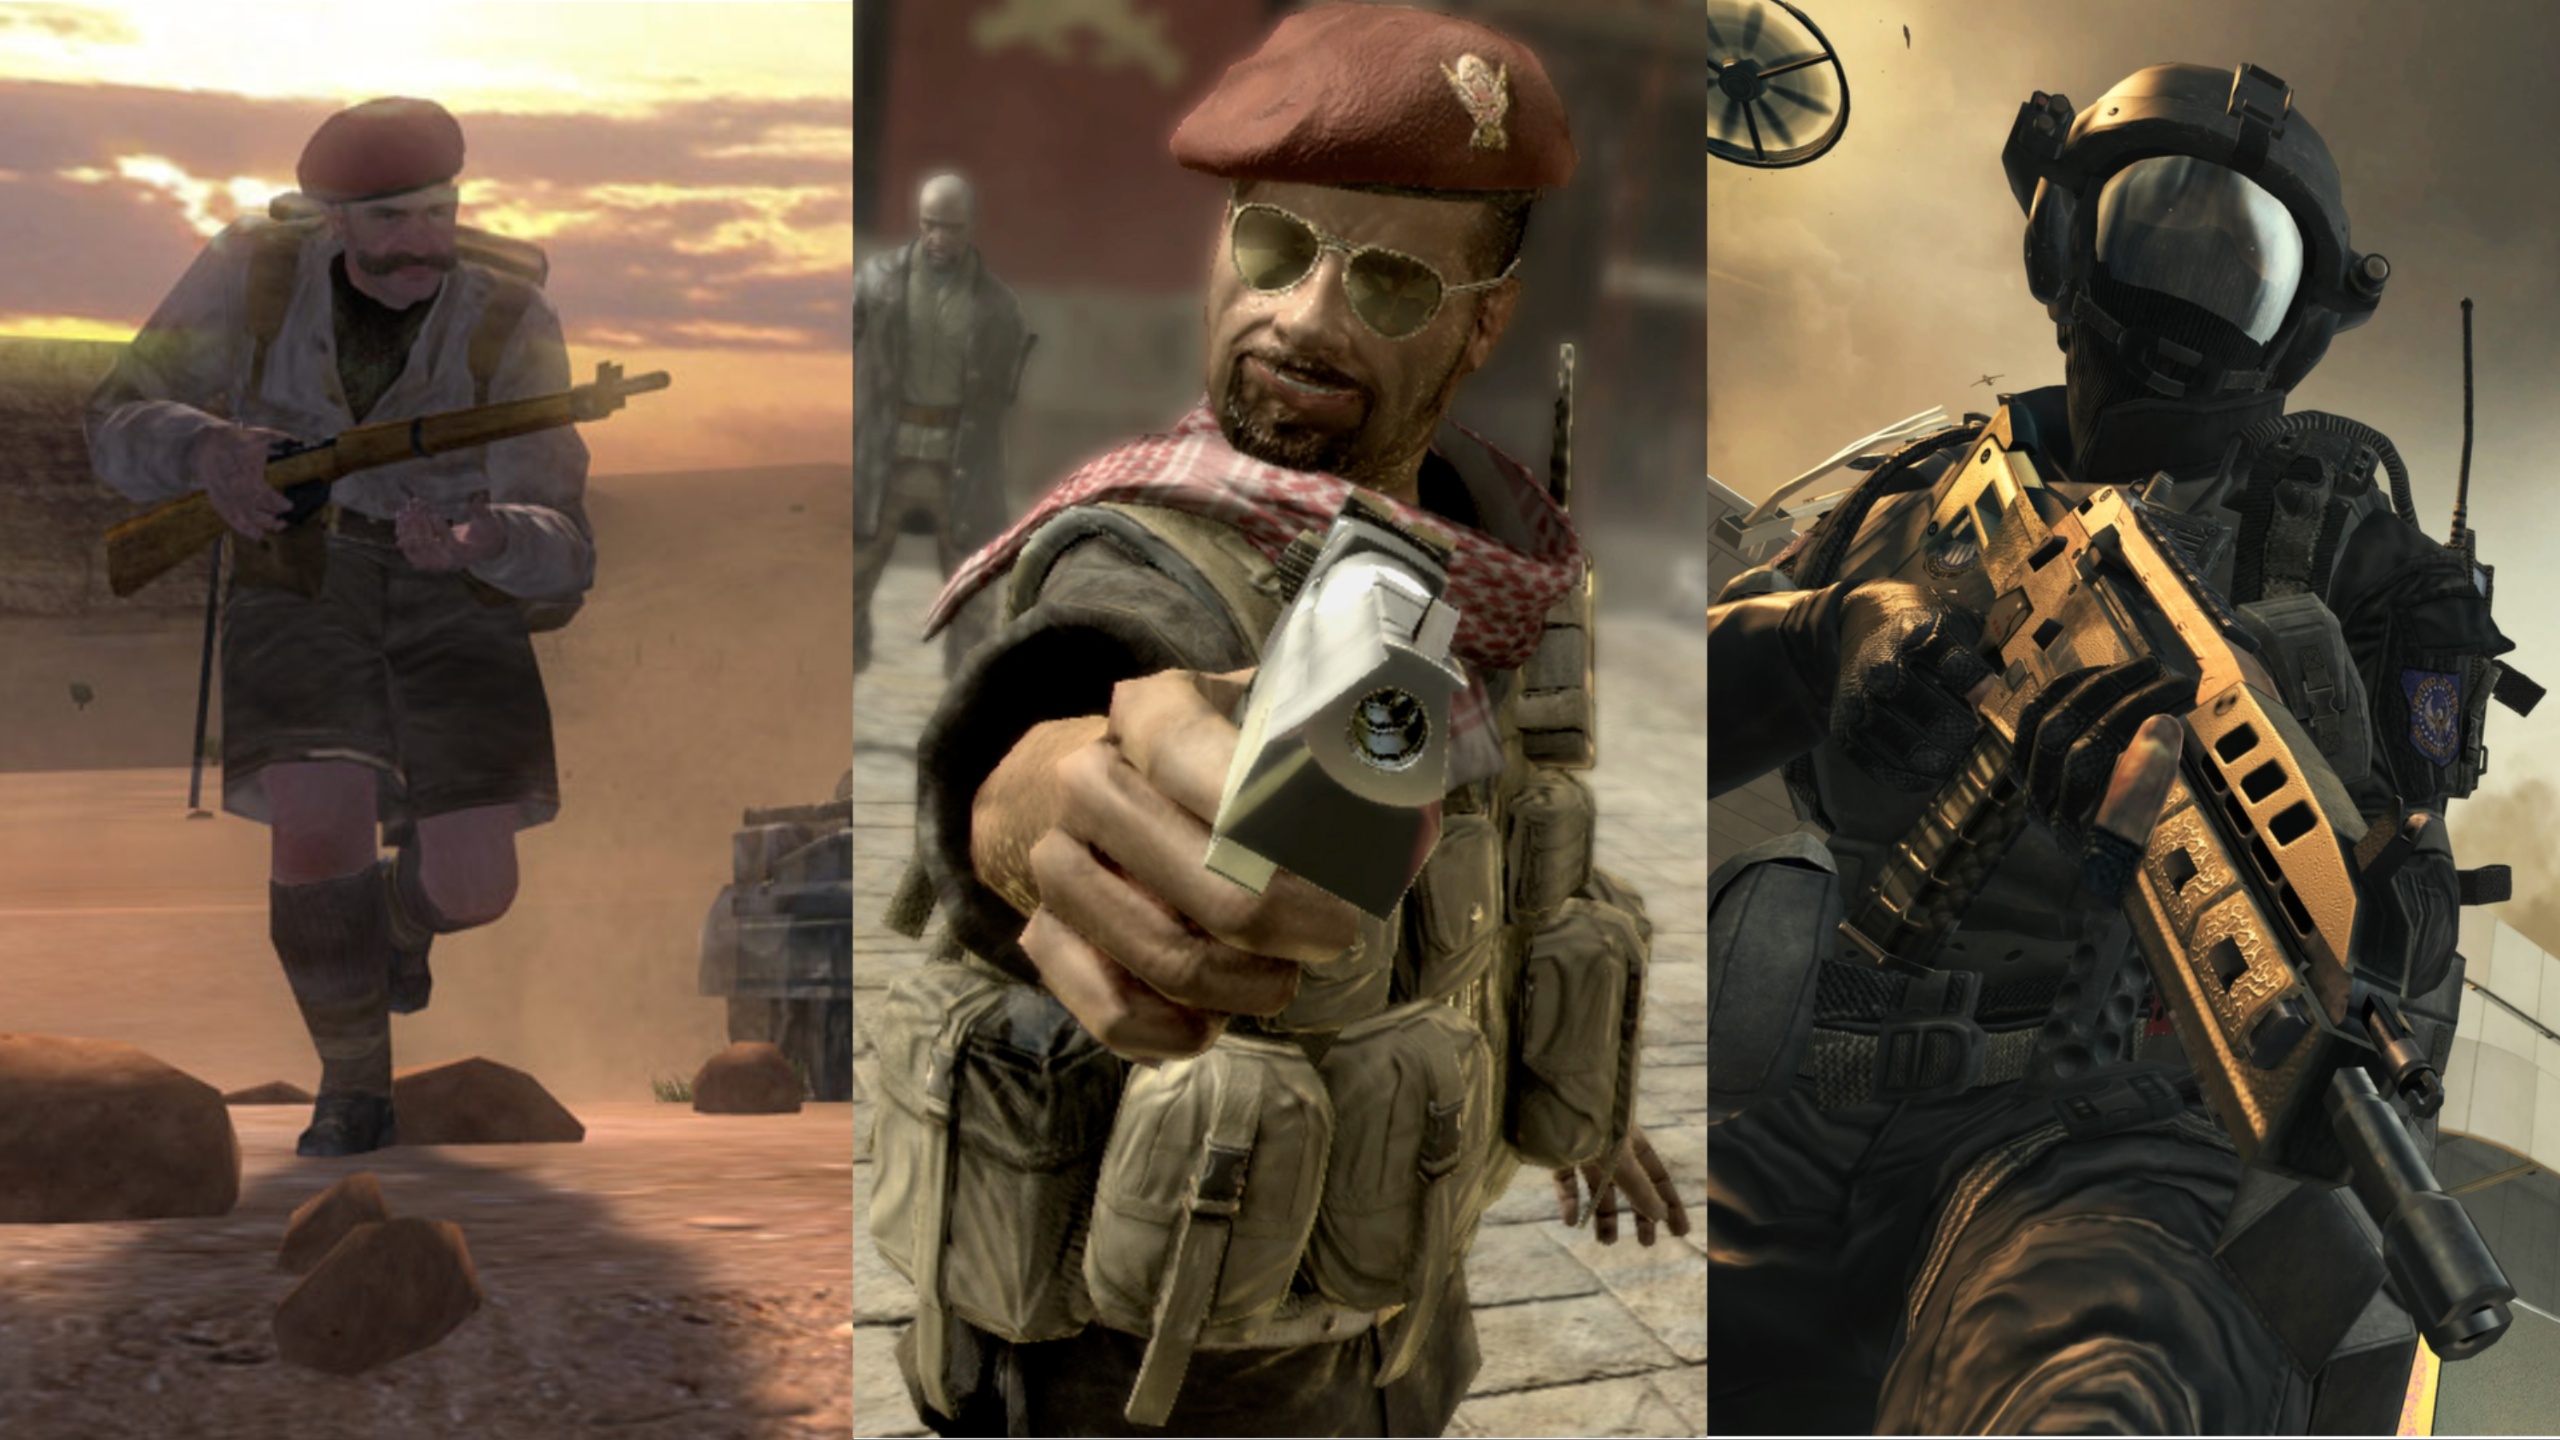 All The Maps In Call Of Duty: Vanguard Multiplayer, Ranked